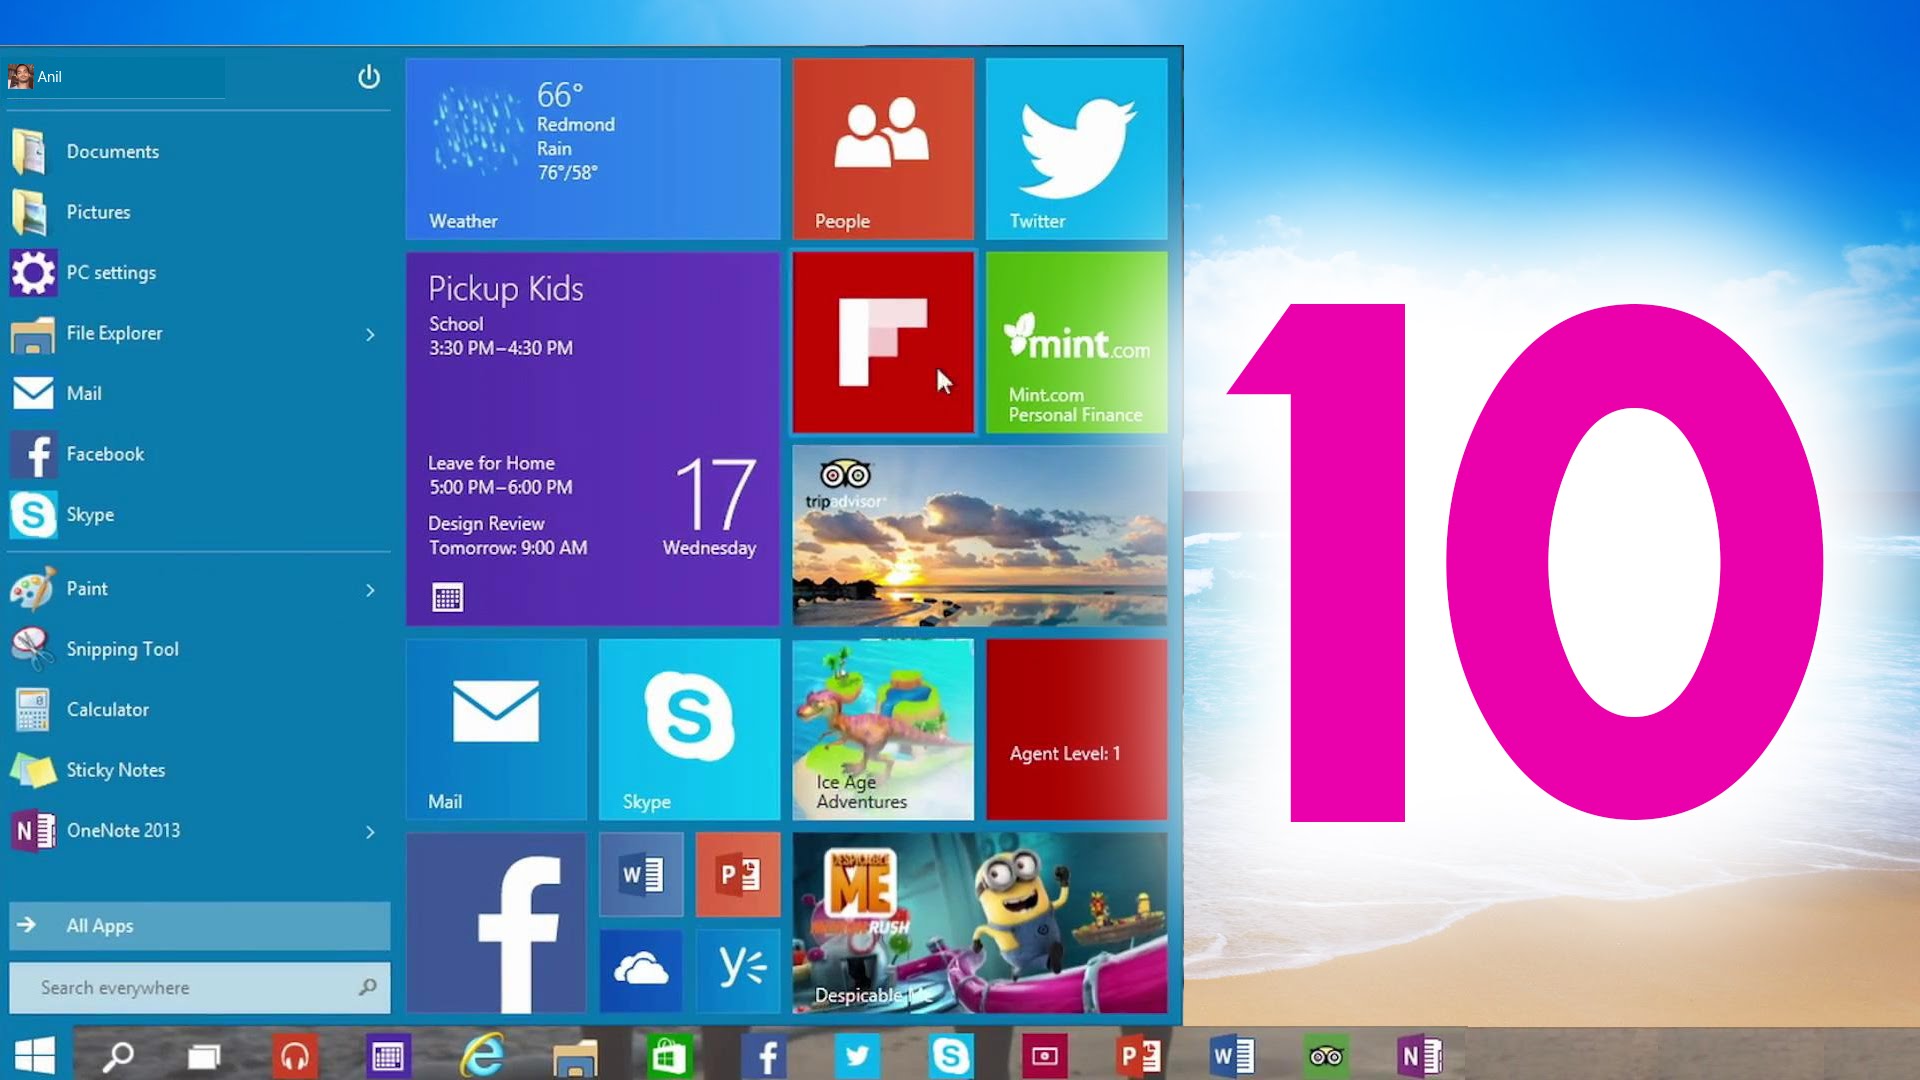 Windows 10 free upgrade - will it be available until March 30, 2017, when Windows 10 Creators Update launches?